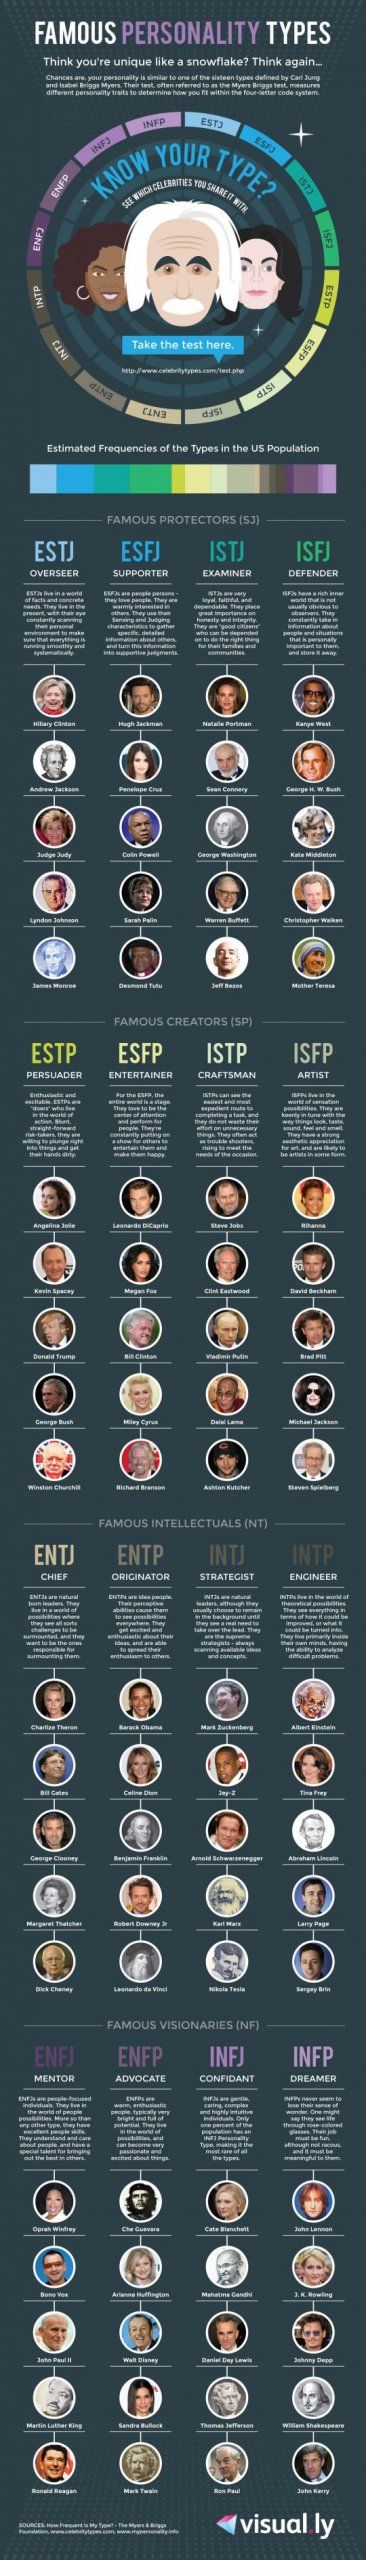 Infographic-Which-Successful-People-Share-Your-Personality-Traits Infographic : Which Successful People Share Your Personality Traits?